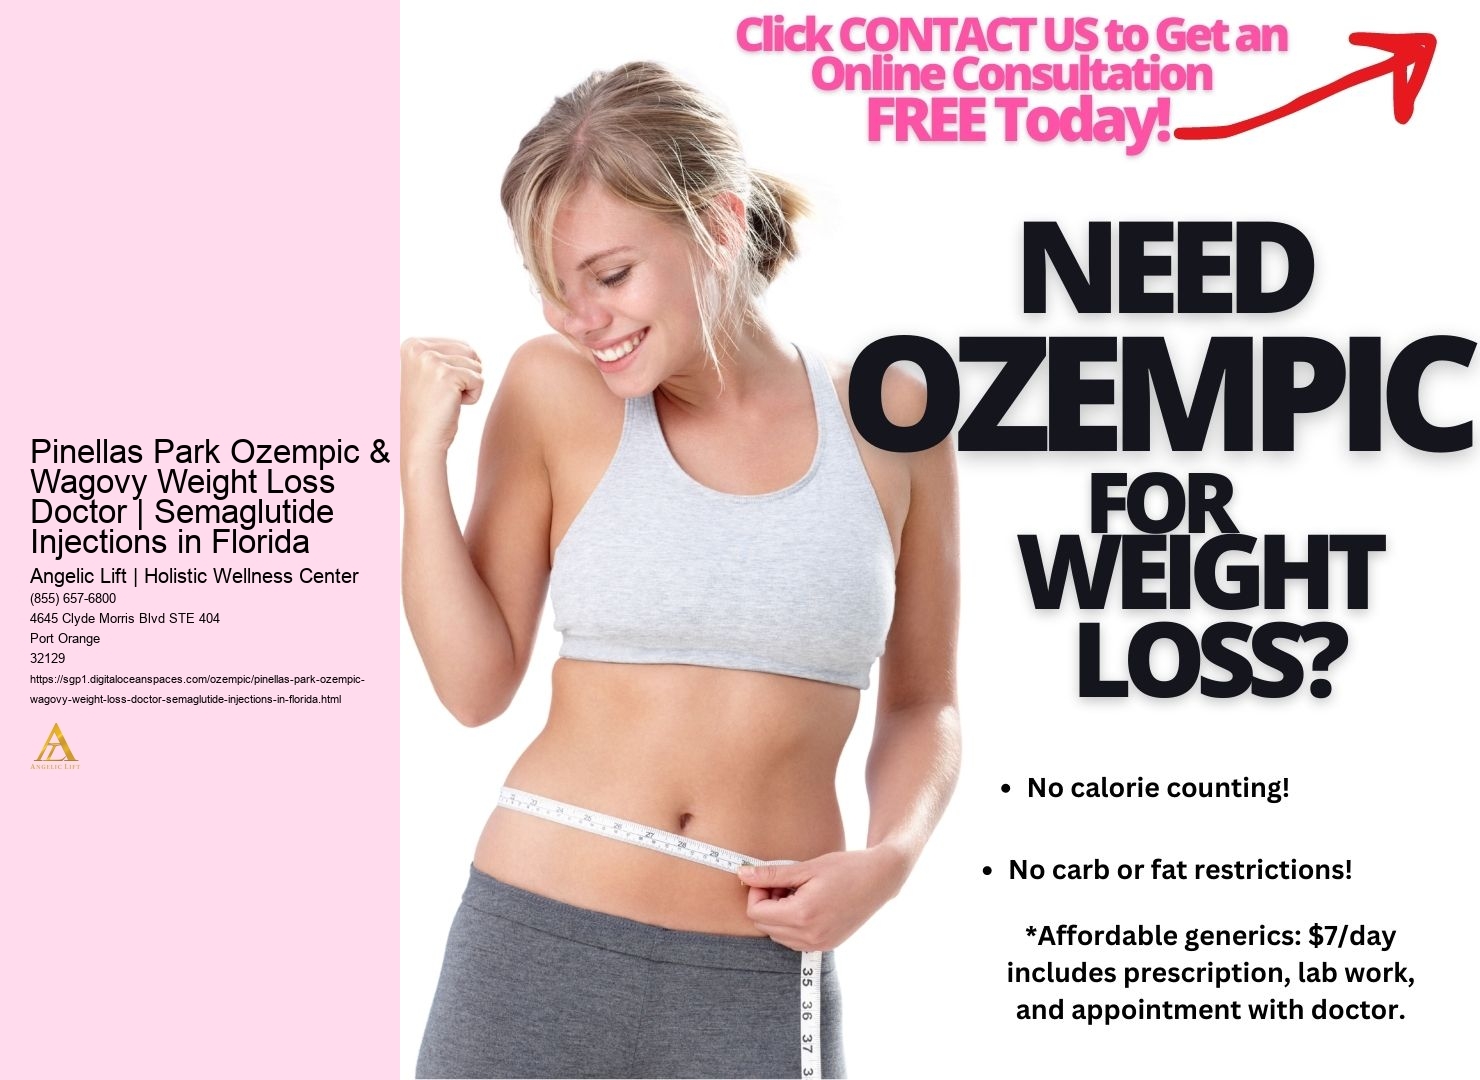 Pinellas Park Ozempic & Wagovy Weight Loss Doctor | Semaglutide Injections in Florida